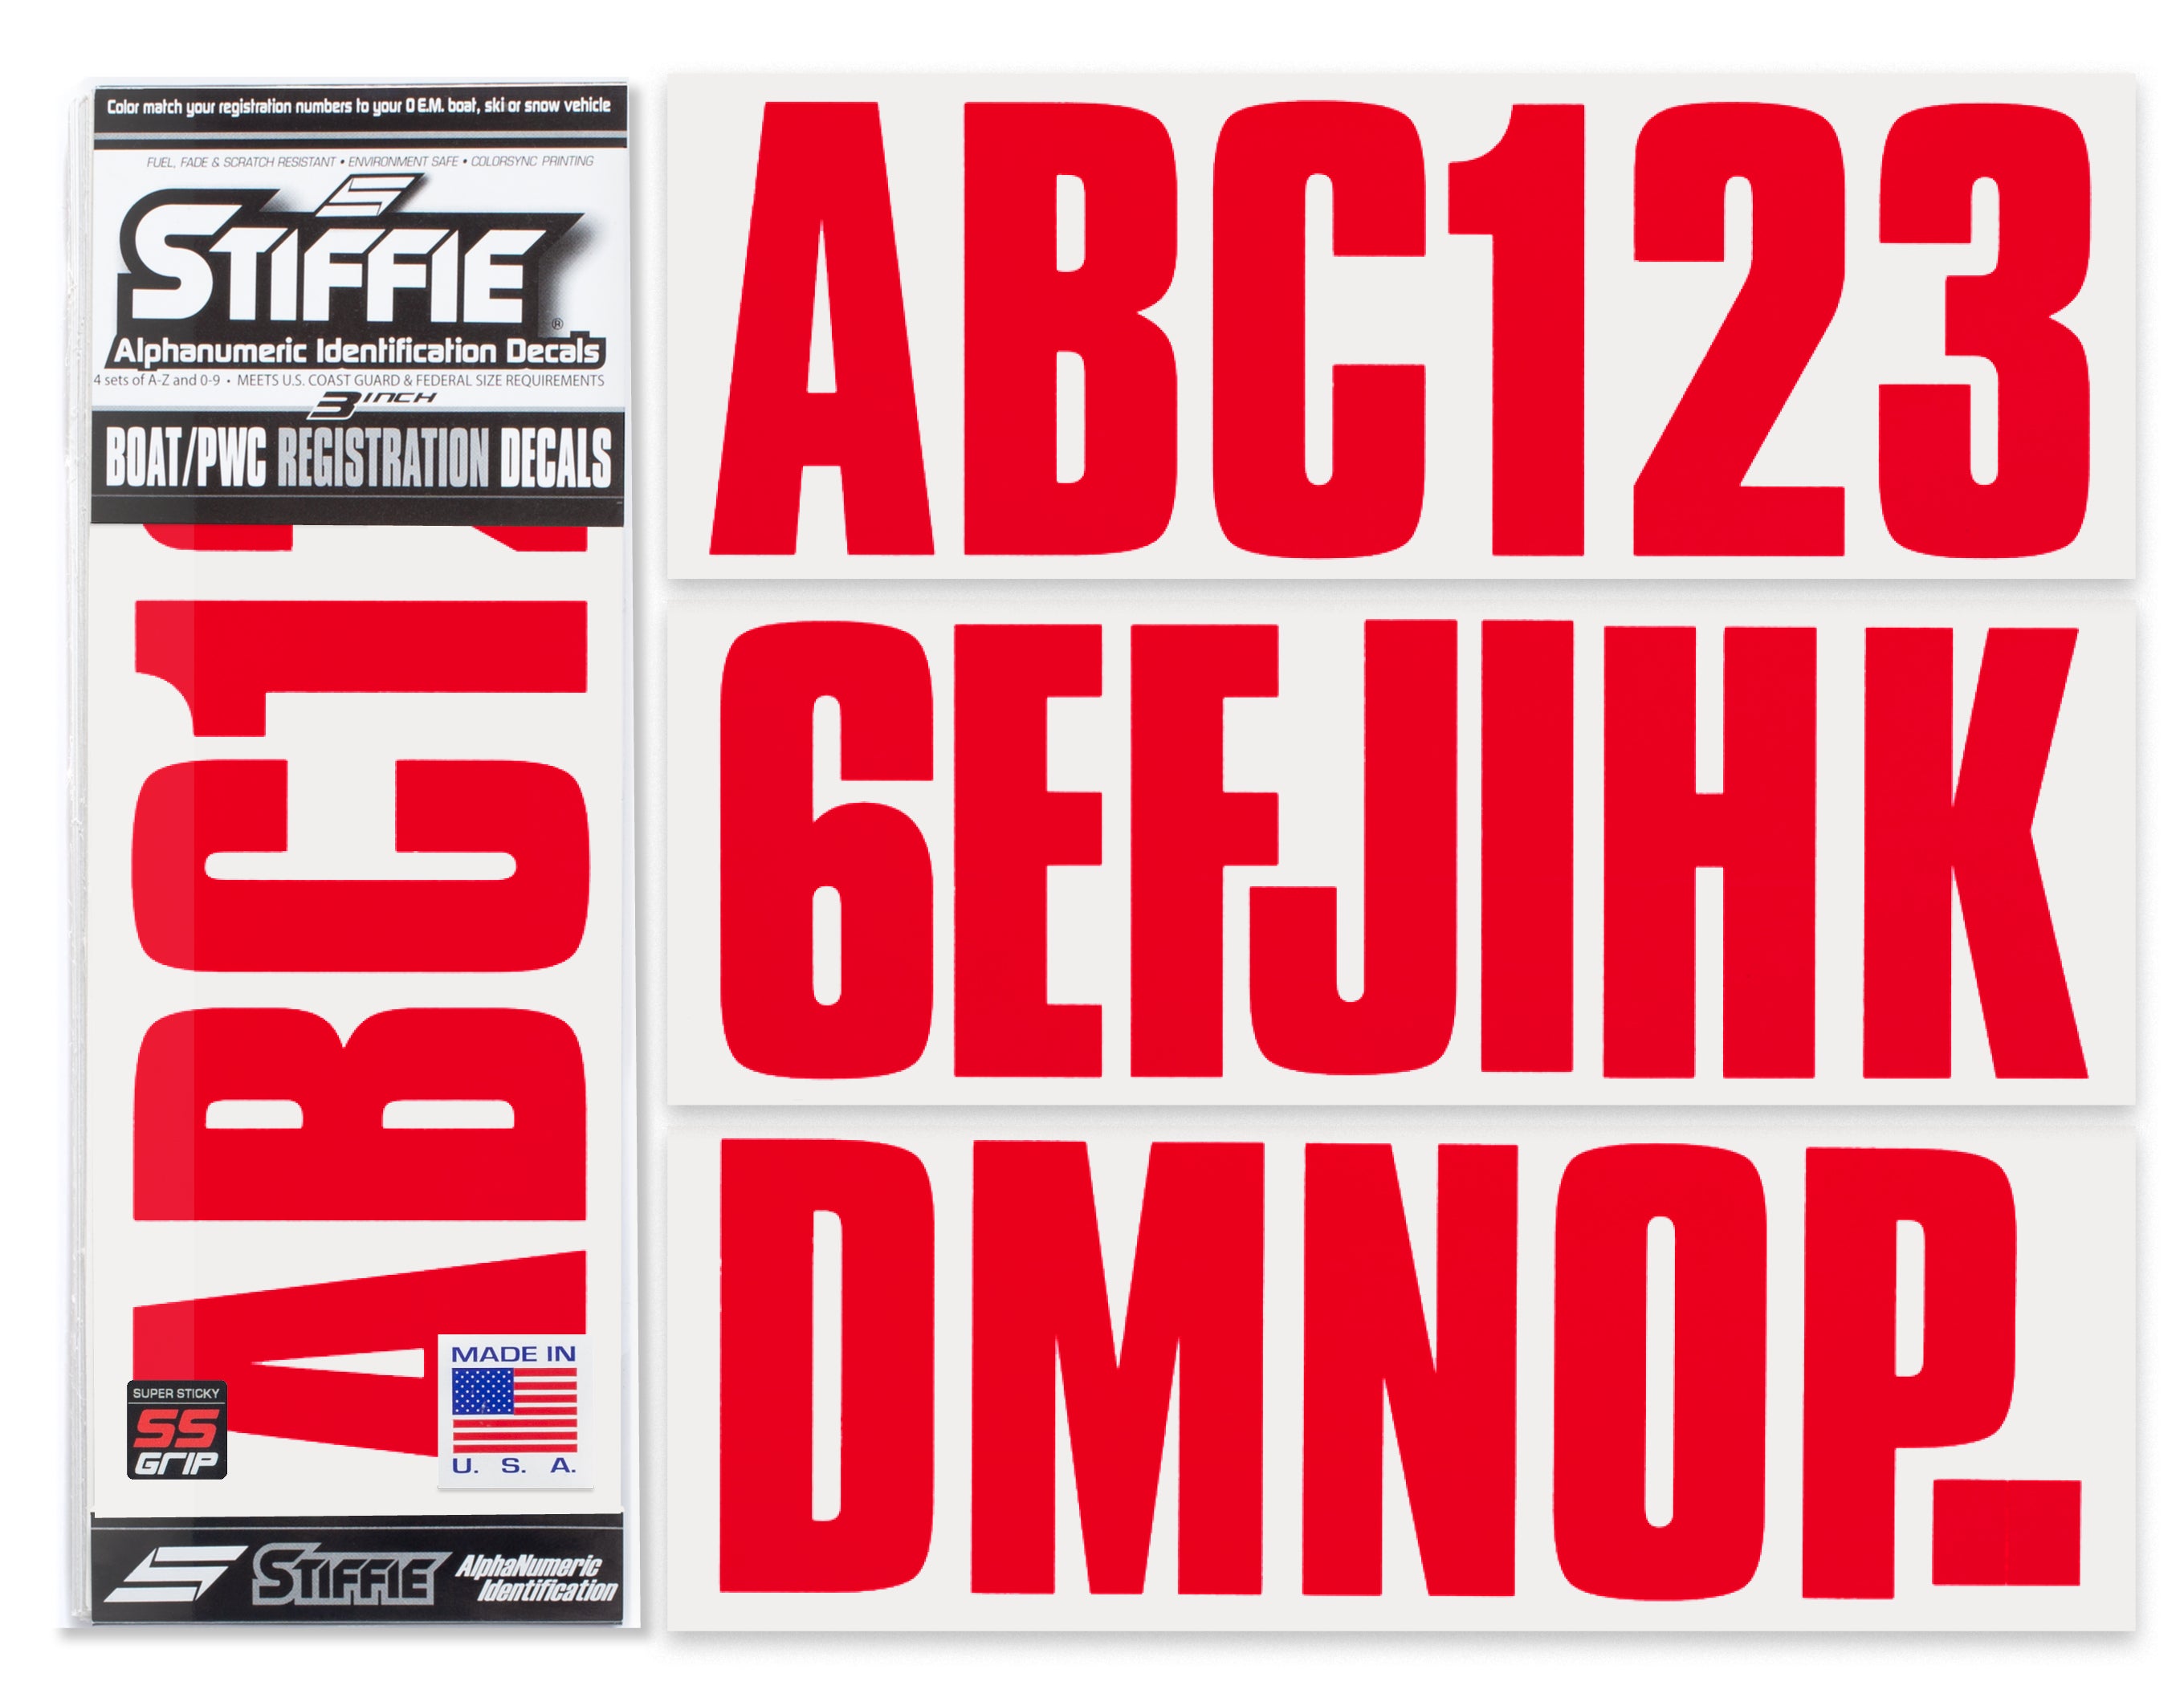 STIFFIE Uniline Lava Red Super Sticky 3" Alpha Numeric Registration Identification Numbers Stickers Decals for Sea-Doo Spark, Inflatable Boats, Ribs, Hypalon/PVC, PWC and Boats